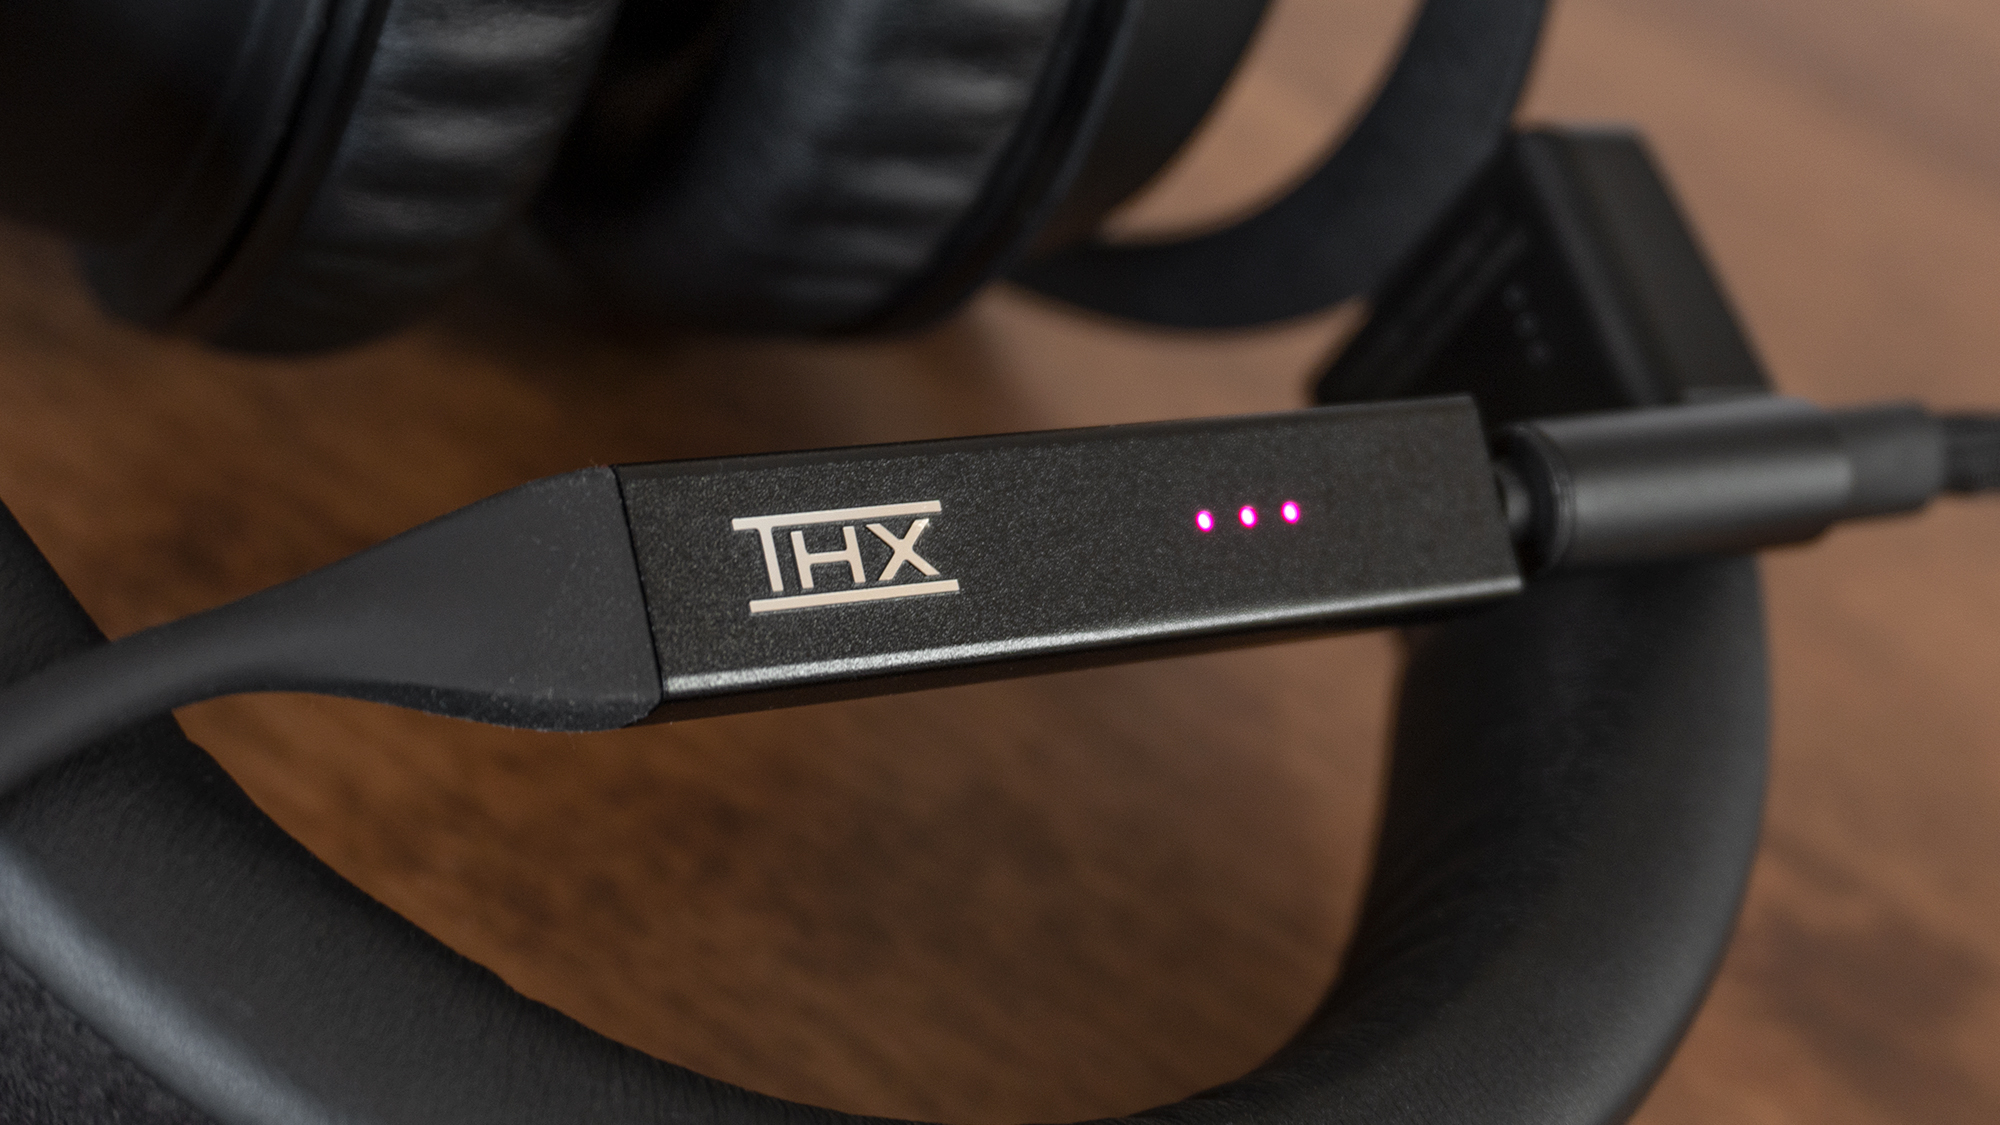 A set of three colour-changing LEDs on the THX Onyx indicate the quality level of the music you're listening to in four stages from CD quality to up to MQA studio quality. (Photo: Andrew Liszewski/Gizmodo)